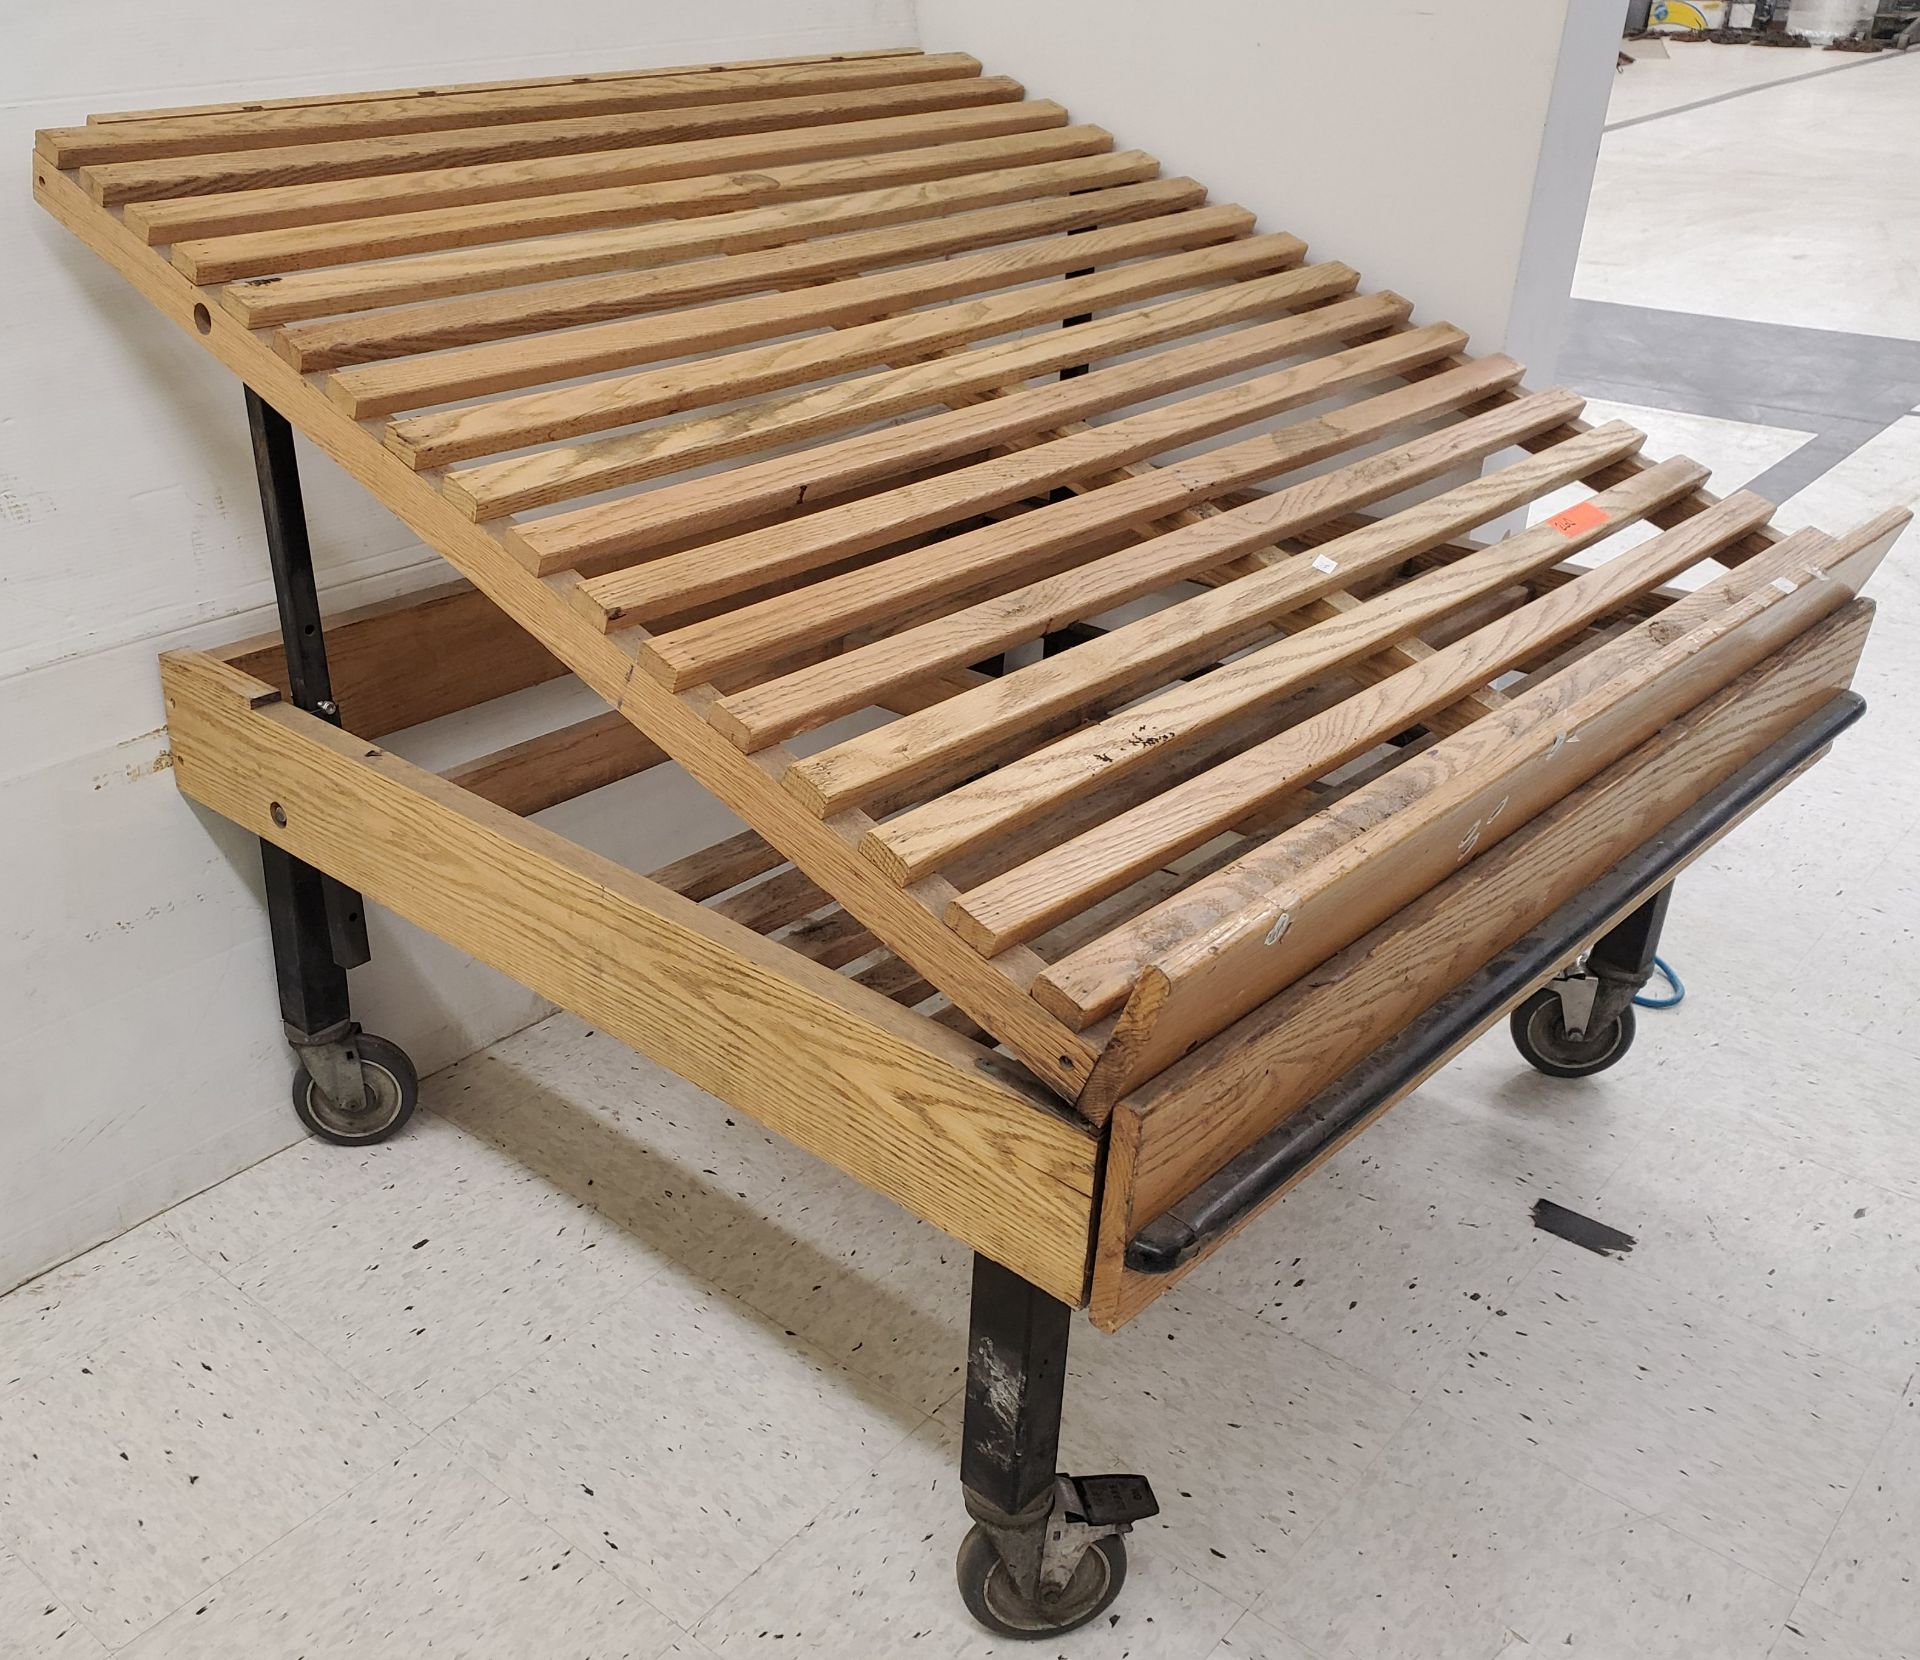 Angled Wooden Rolling Display Rack - Image 2 of 3